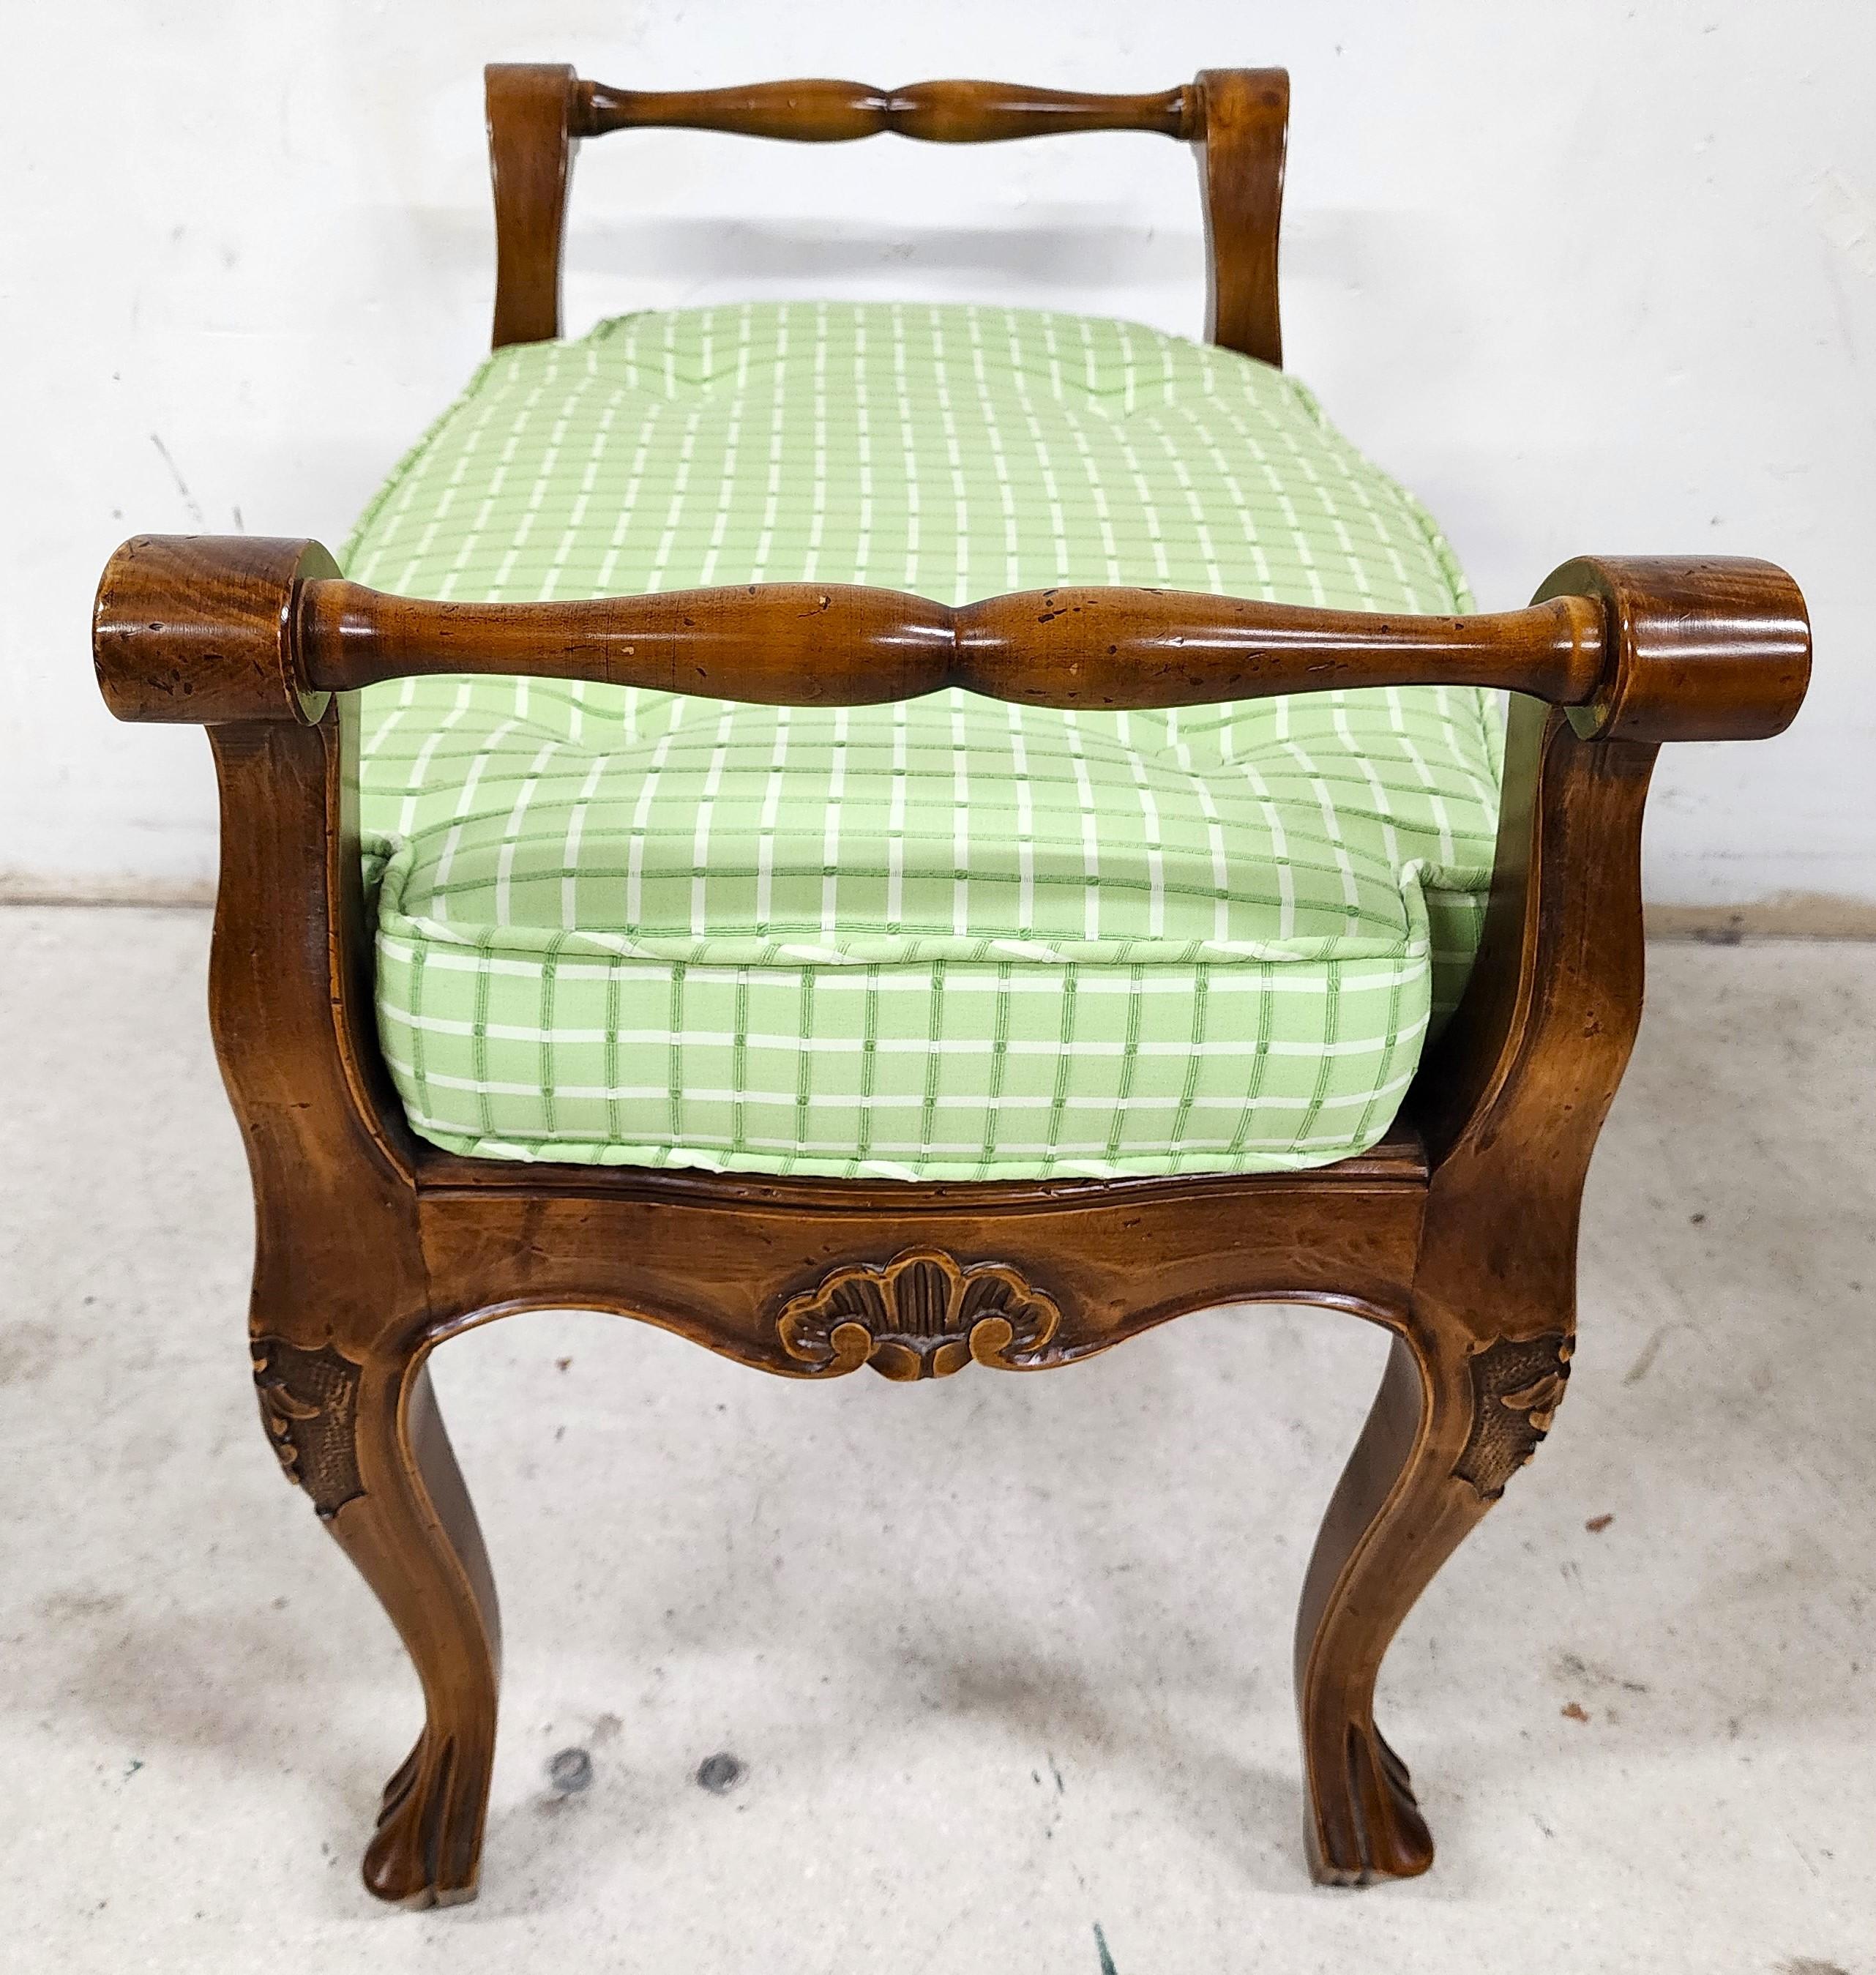 Italian Vintage Country French Bench with Cane Sea Reversible Cushion